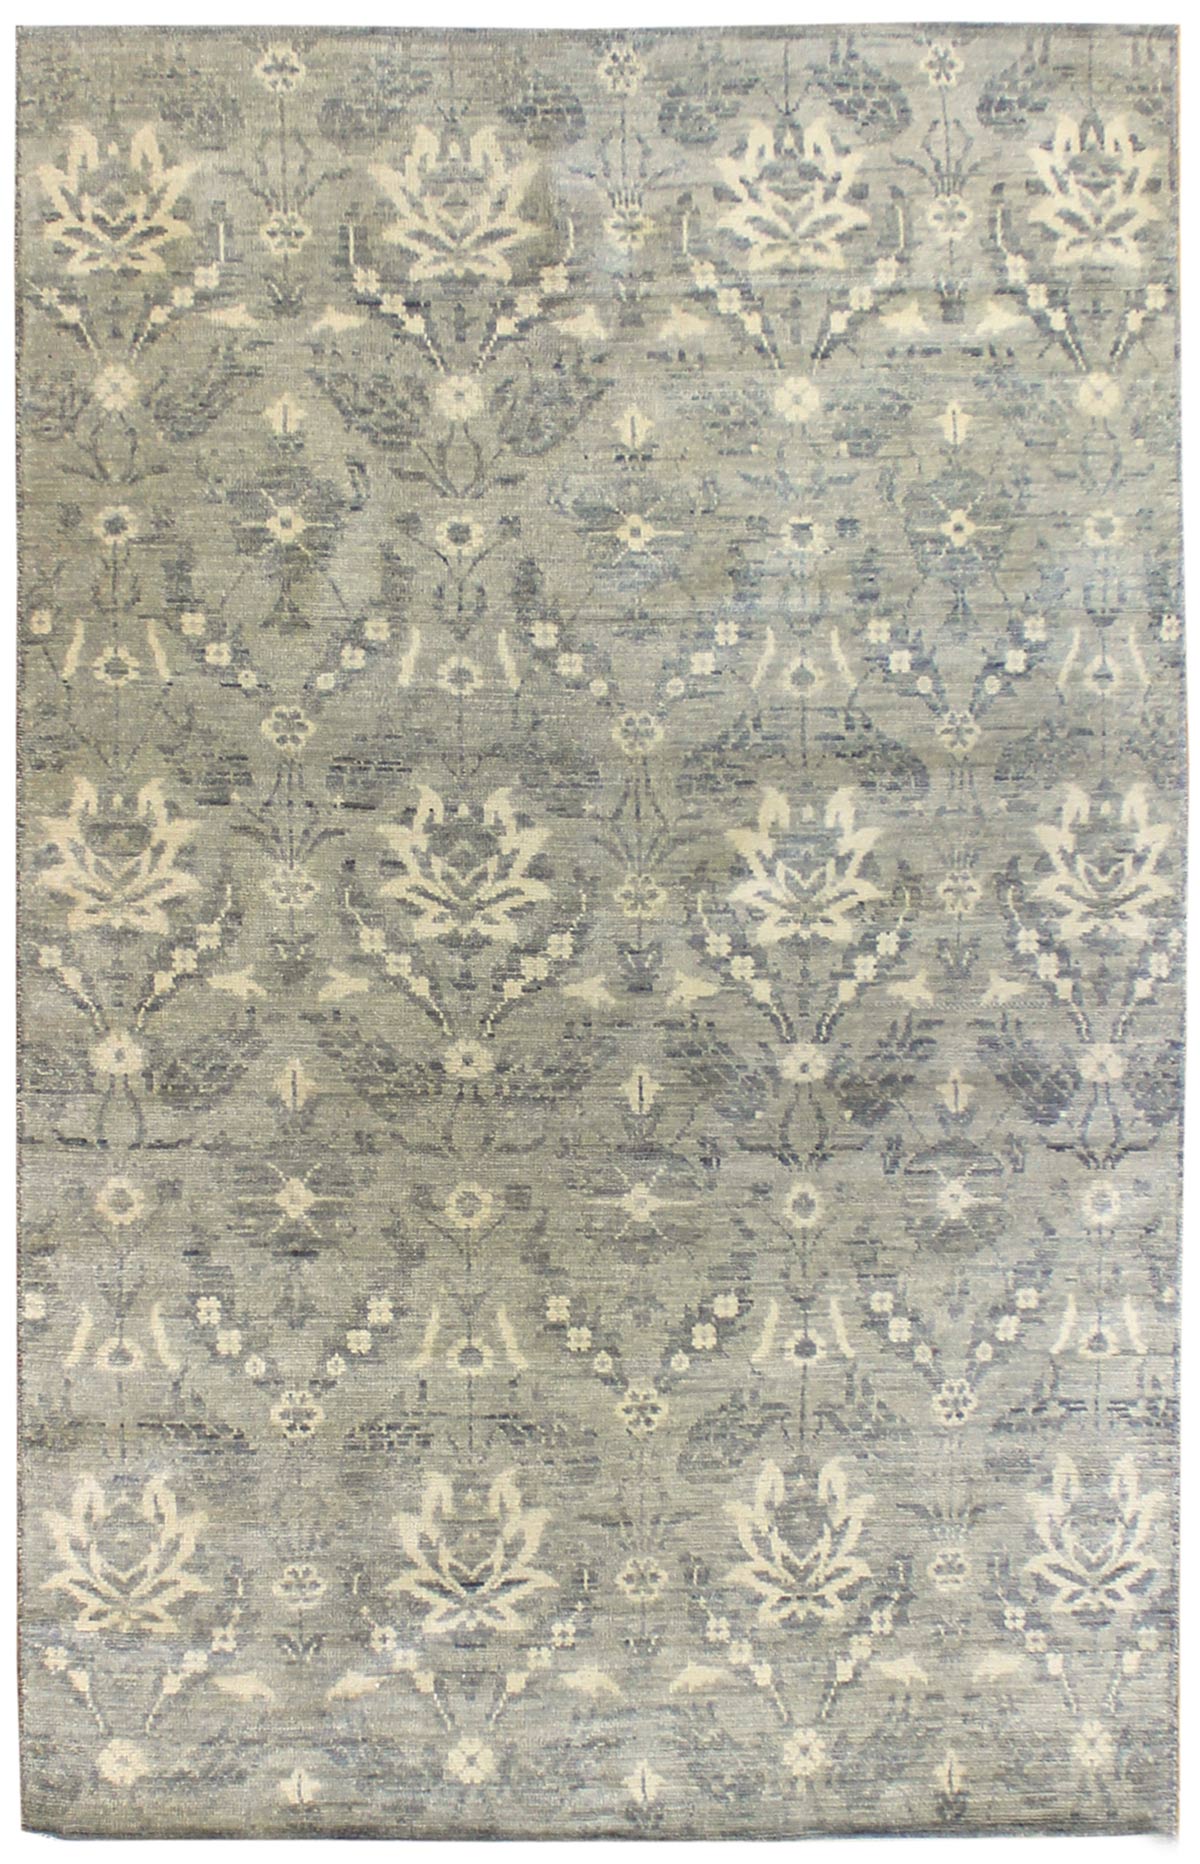 Arts & Crafts Handwoven Traditional Rug